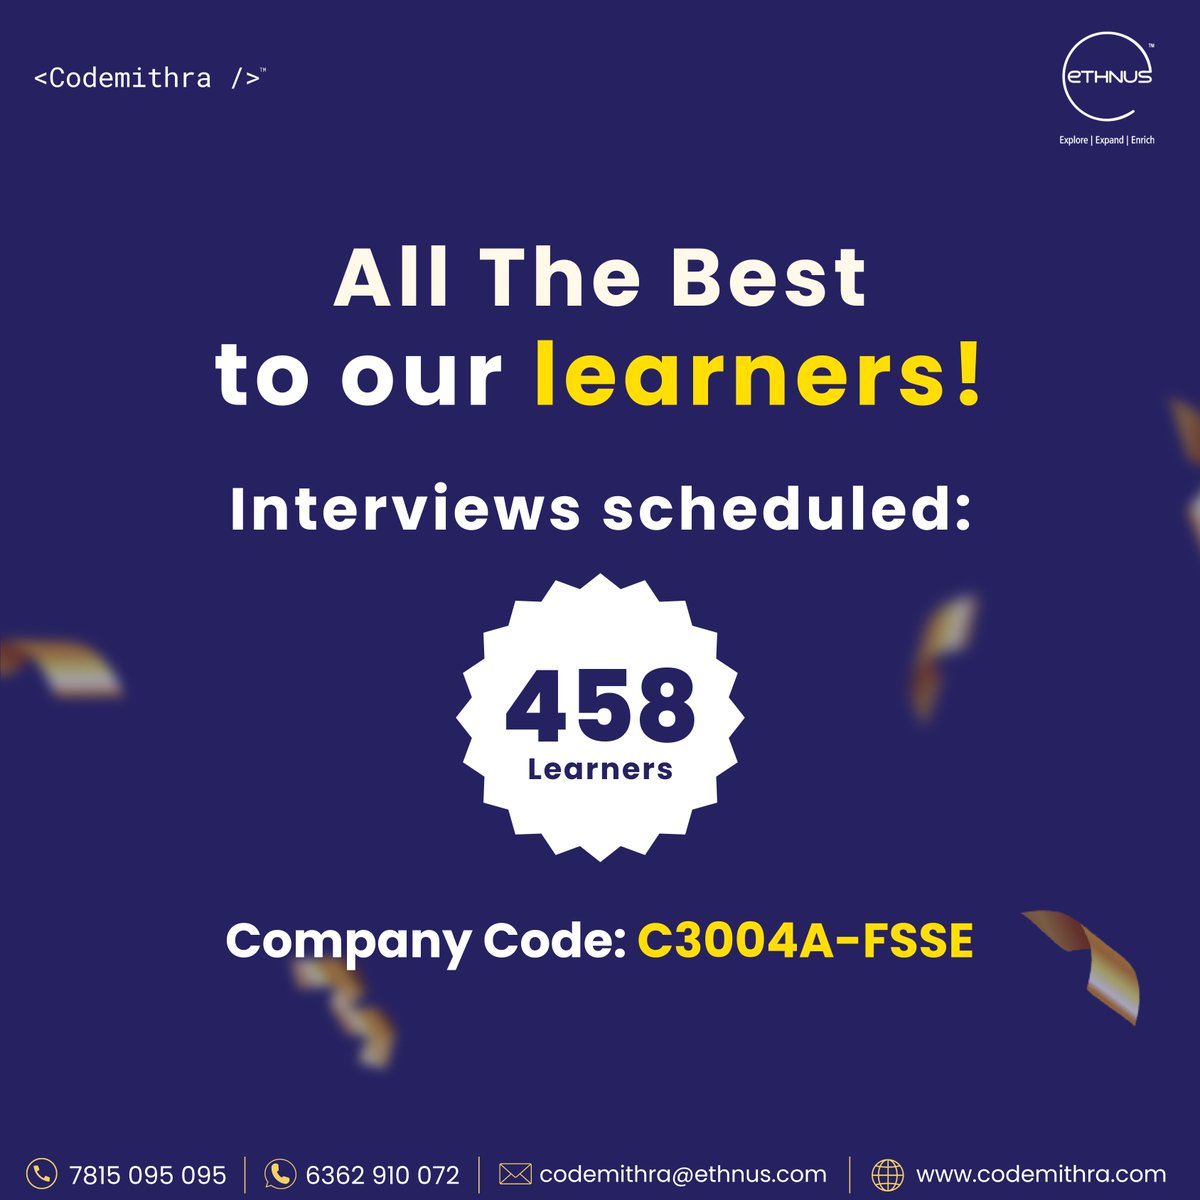 Best wishes to our 458 learners whose interviews have been scheduled.

#careeropportunity #hiringnow #jobhunt #bangalorejobs #careergrowth #joboffer #career #tech #course #offer #Bengaluru #Karnataka #Bangalore #jobseeker #technology #job #hiring #jobhiring #jobalert #opportunity